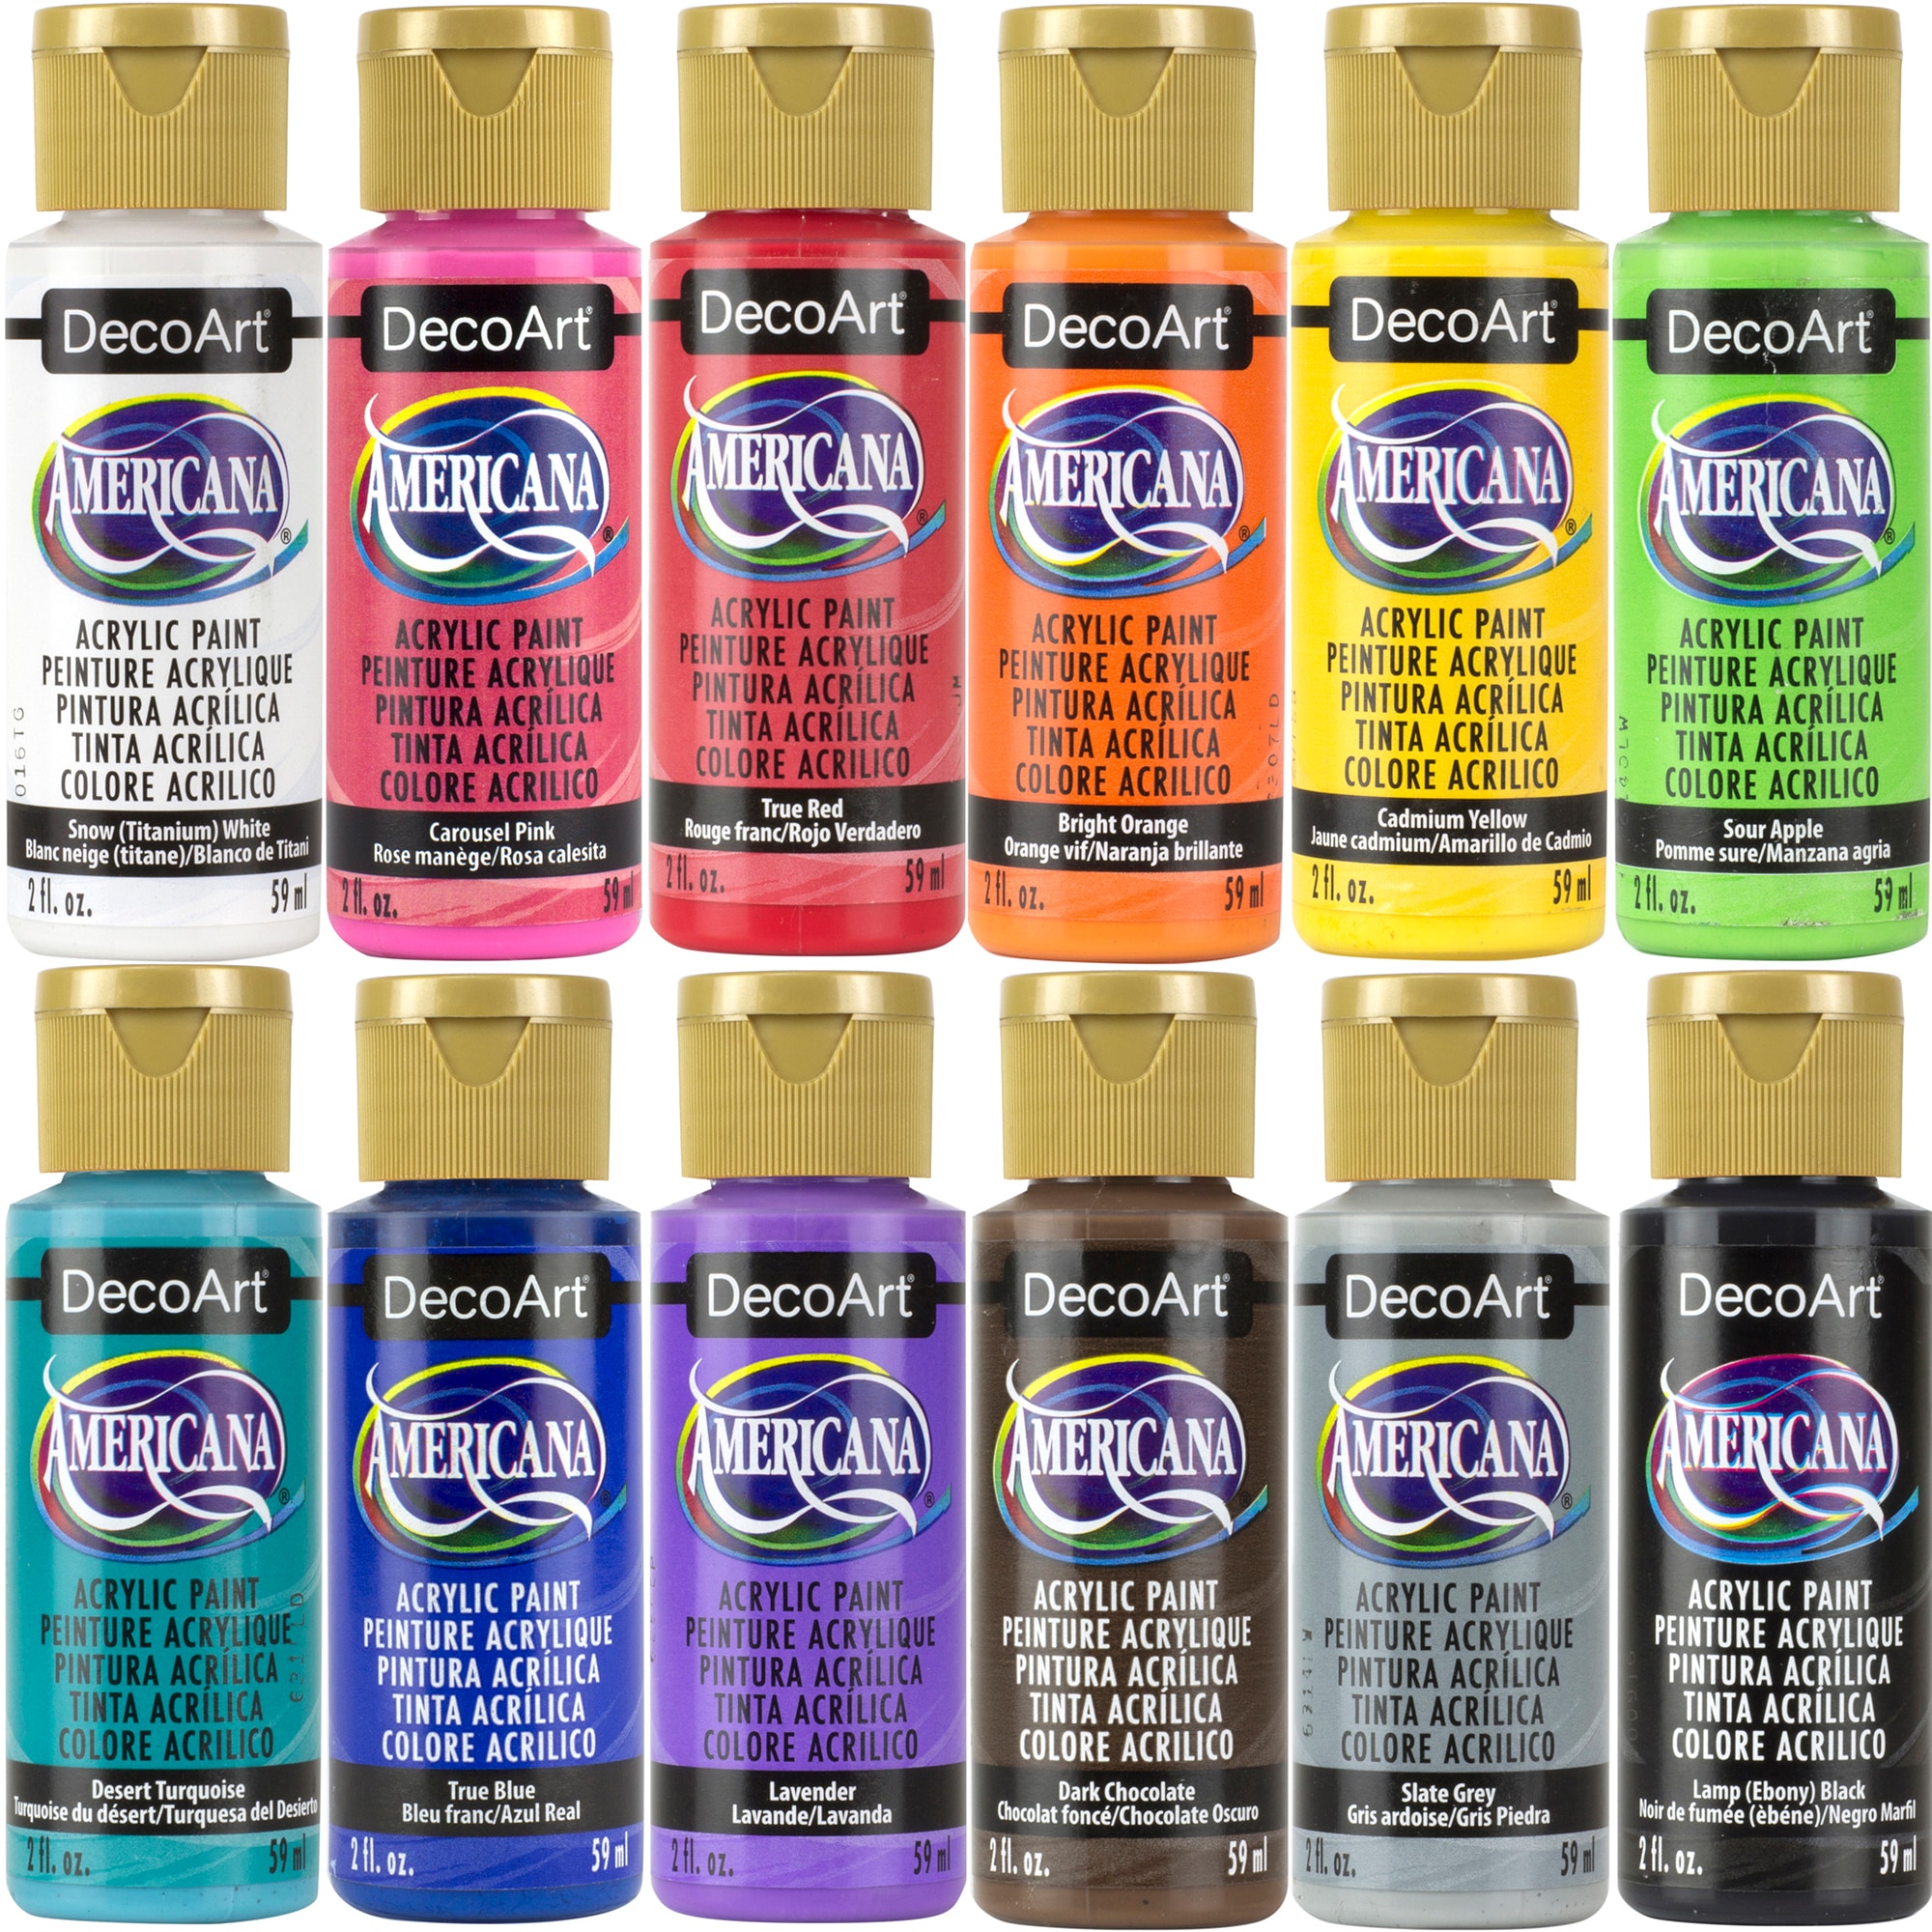 DecoArt Americana 12ct Acrylic Paint Value Pack in the Craft Paint